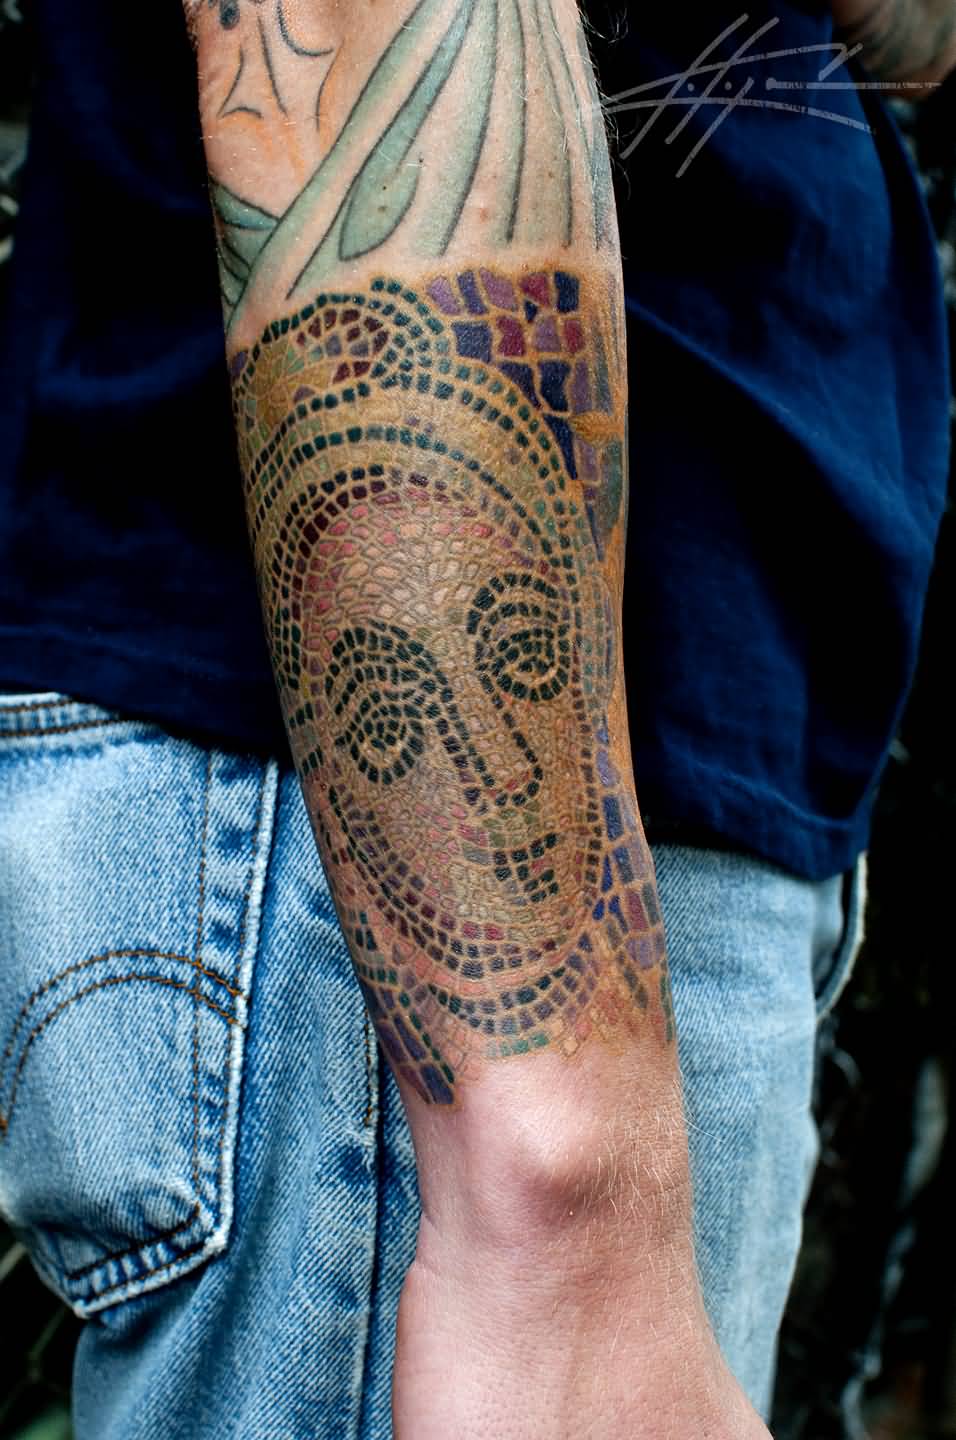 Attractive Mosaic Women Face Tattoo On Forearm